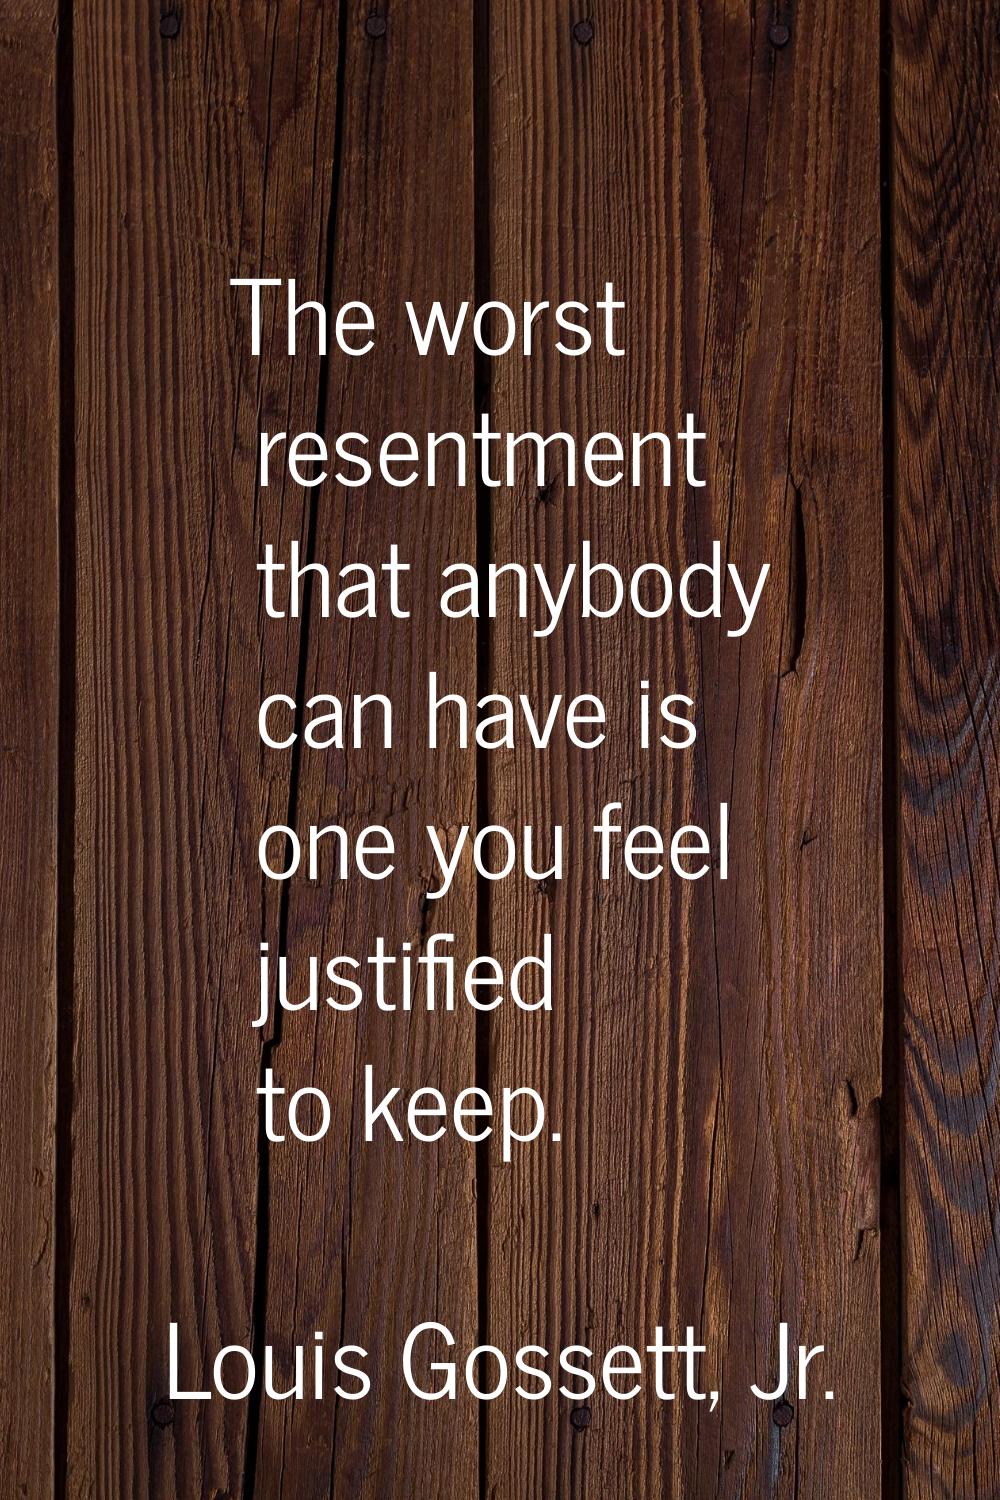 The worst resentment that anybody can have is one you feel justified to keep.